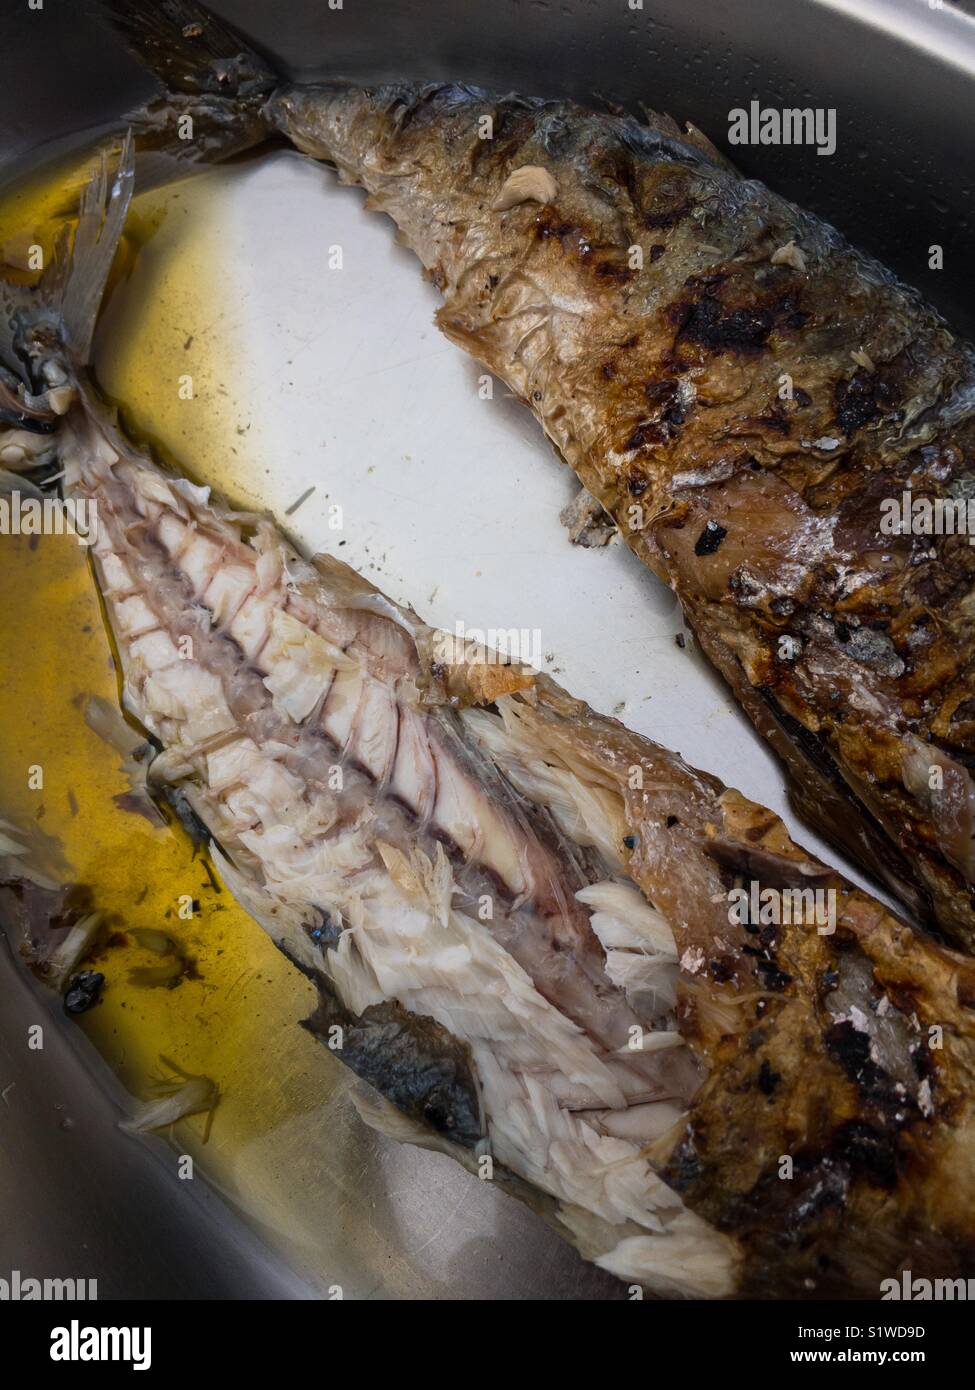 Grilled mackerel fish with olive oil on plate Stock Photo